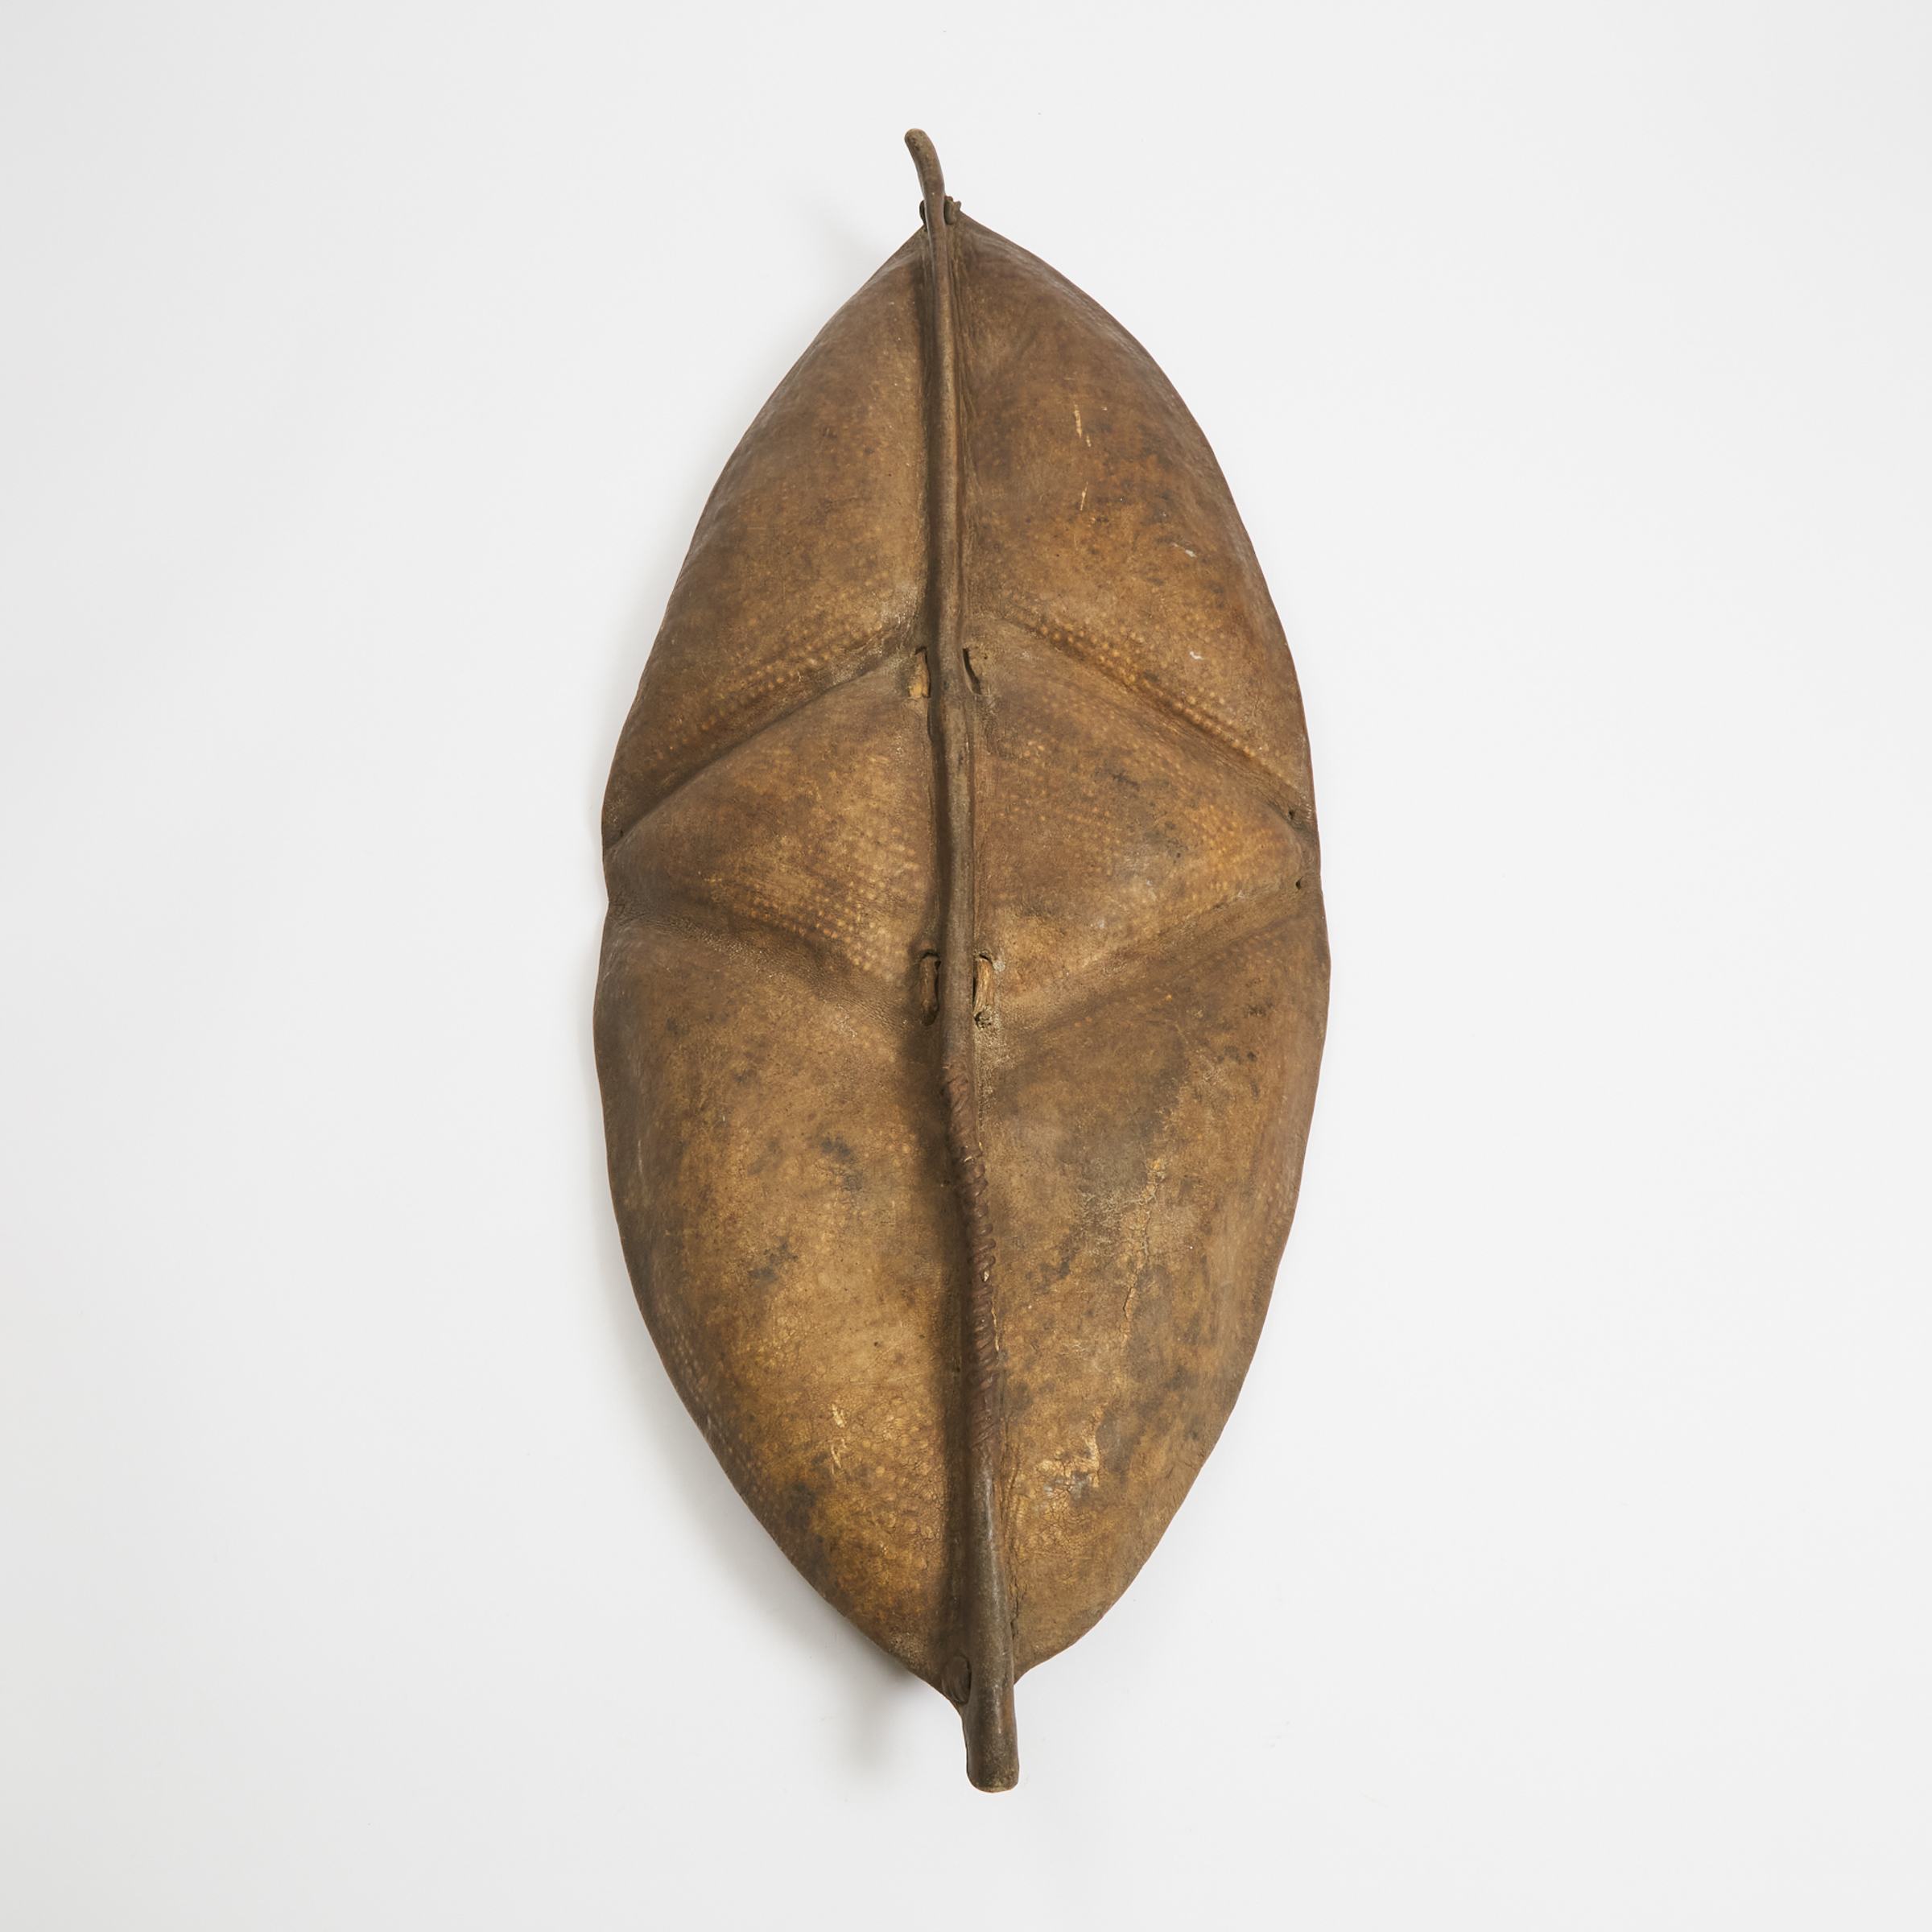 African Hide Shield, possibly Konso, Ethiopian, 19th/20th century